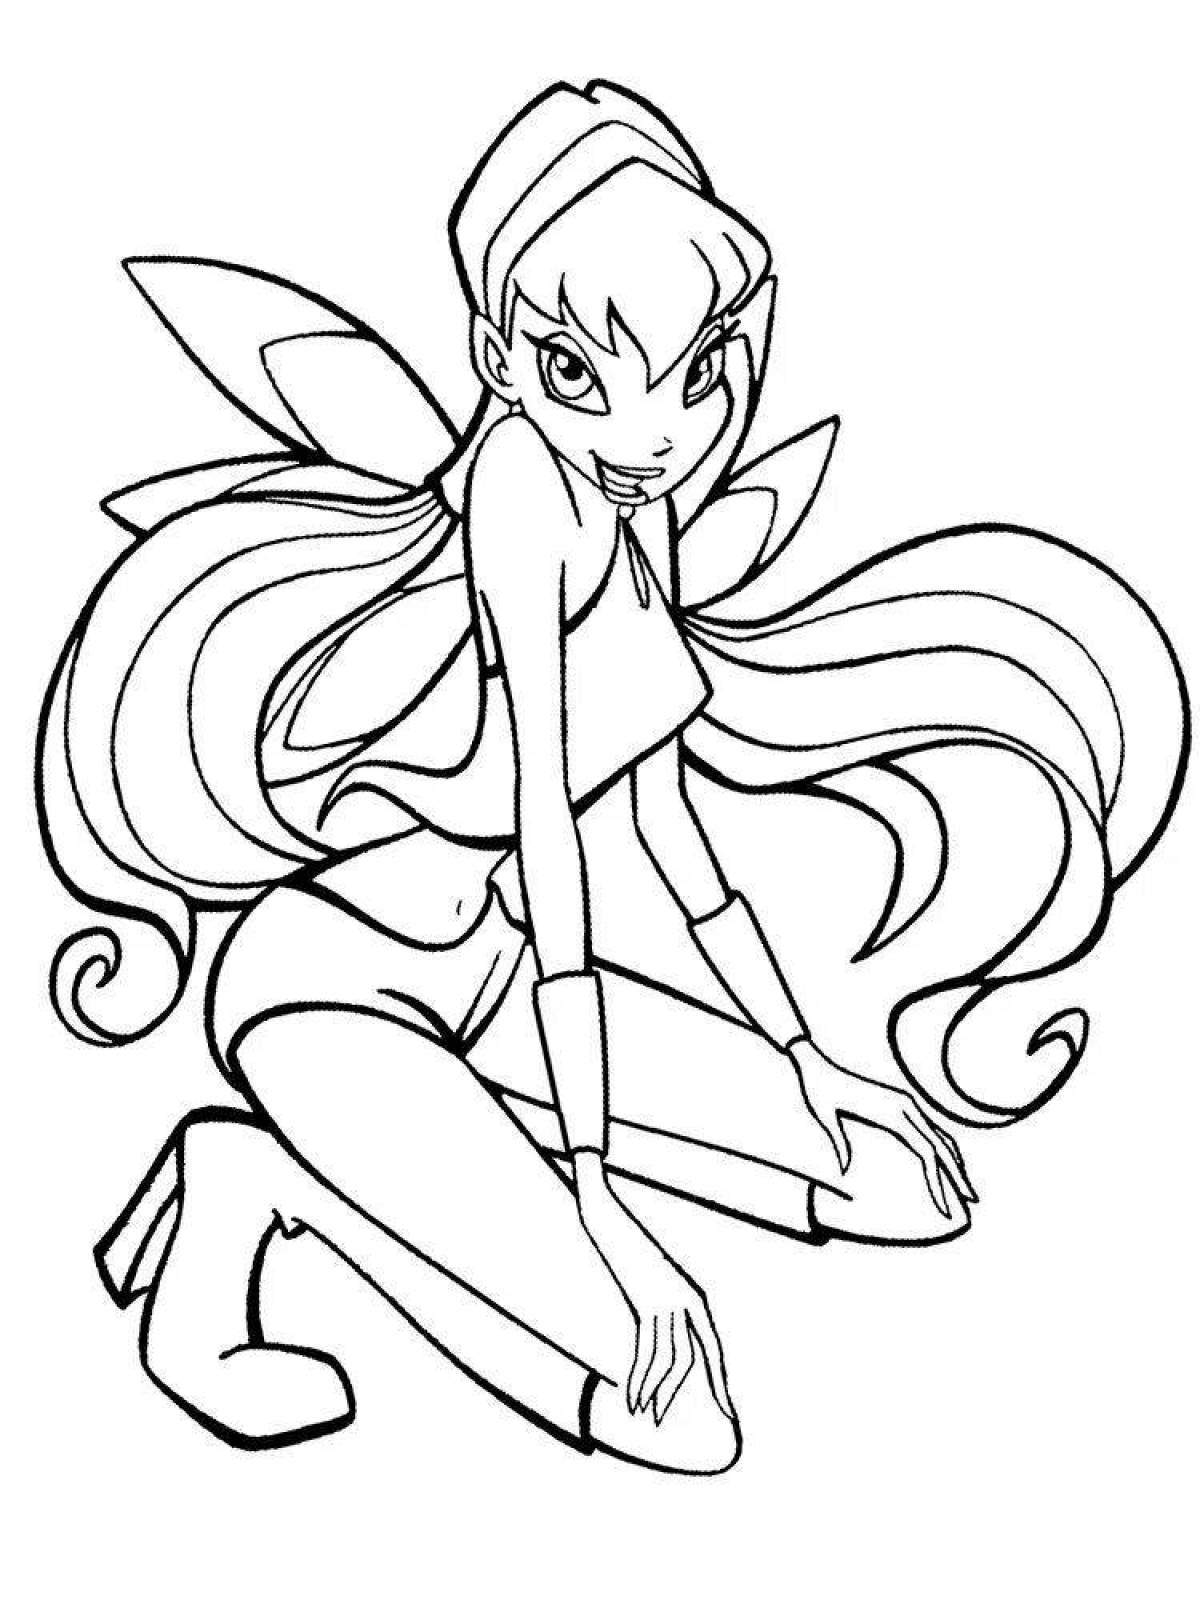 Glitter winx coloring pages for kids